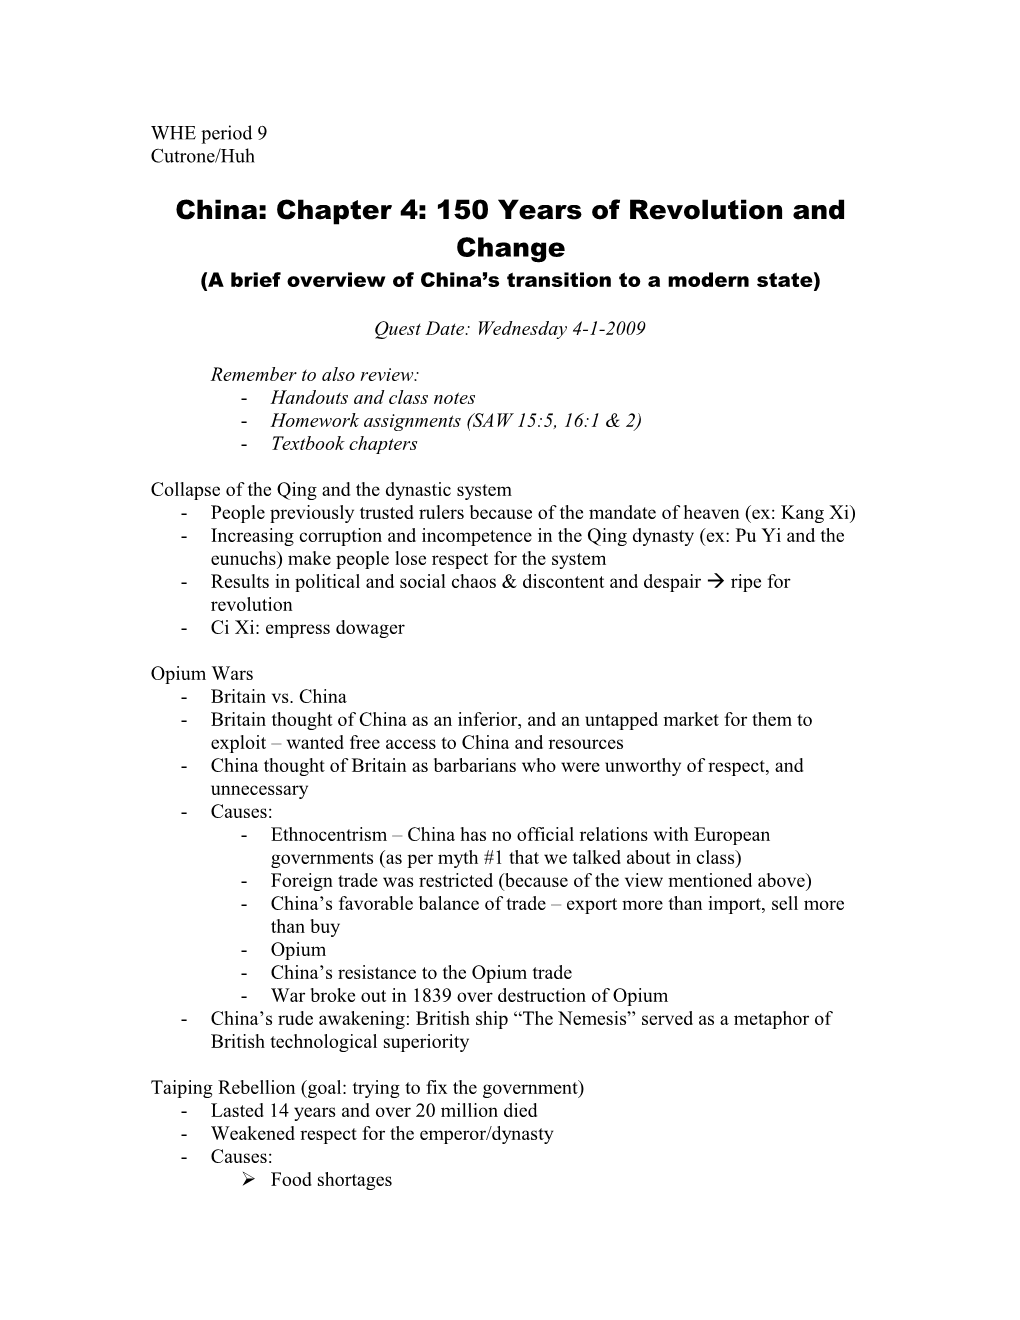 China: Chapter 4: 150 Years of Revolution and Change